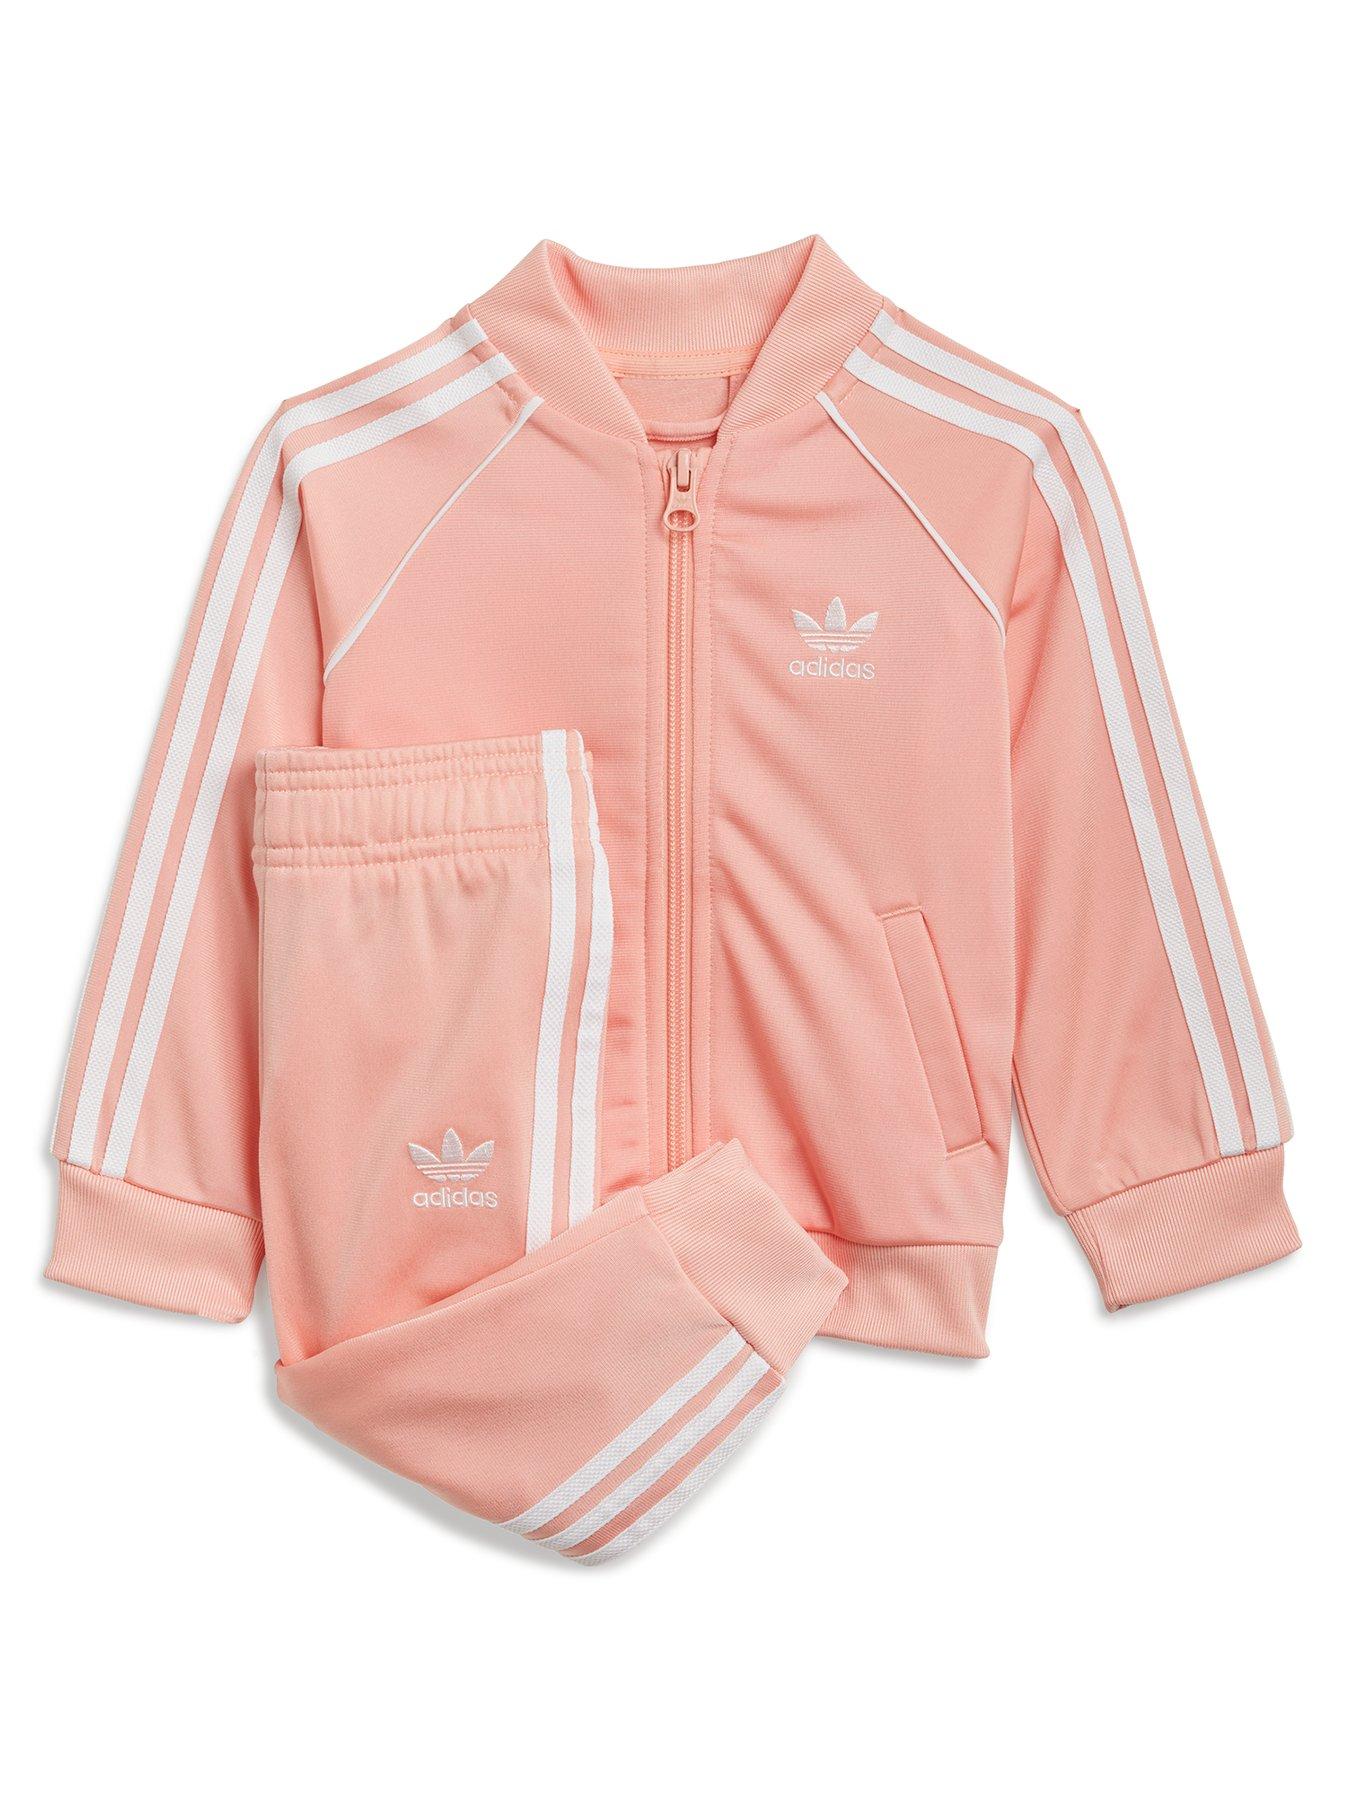 adidas tracksuit 18 months